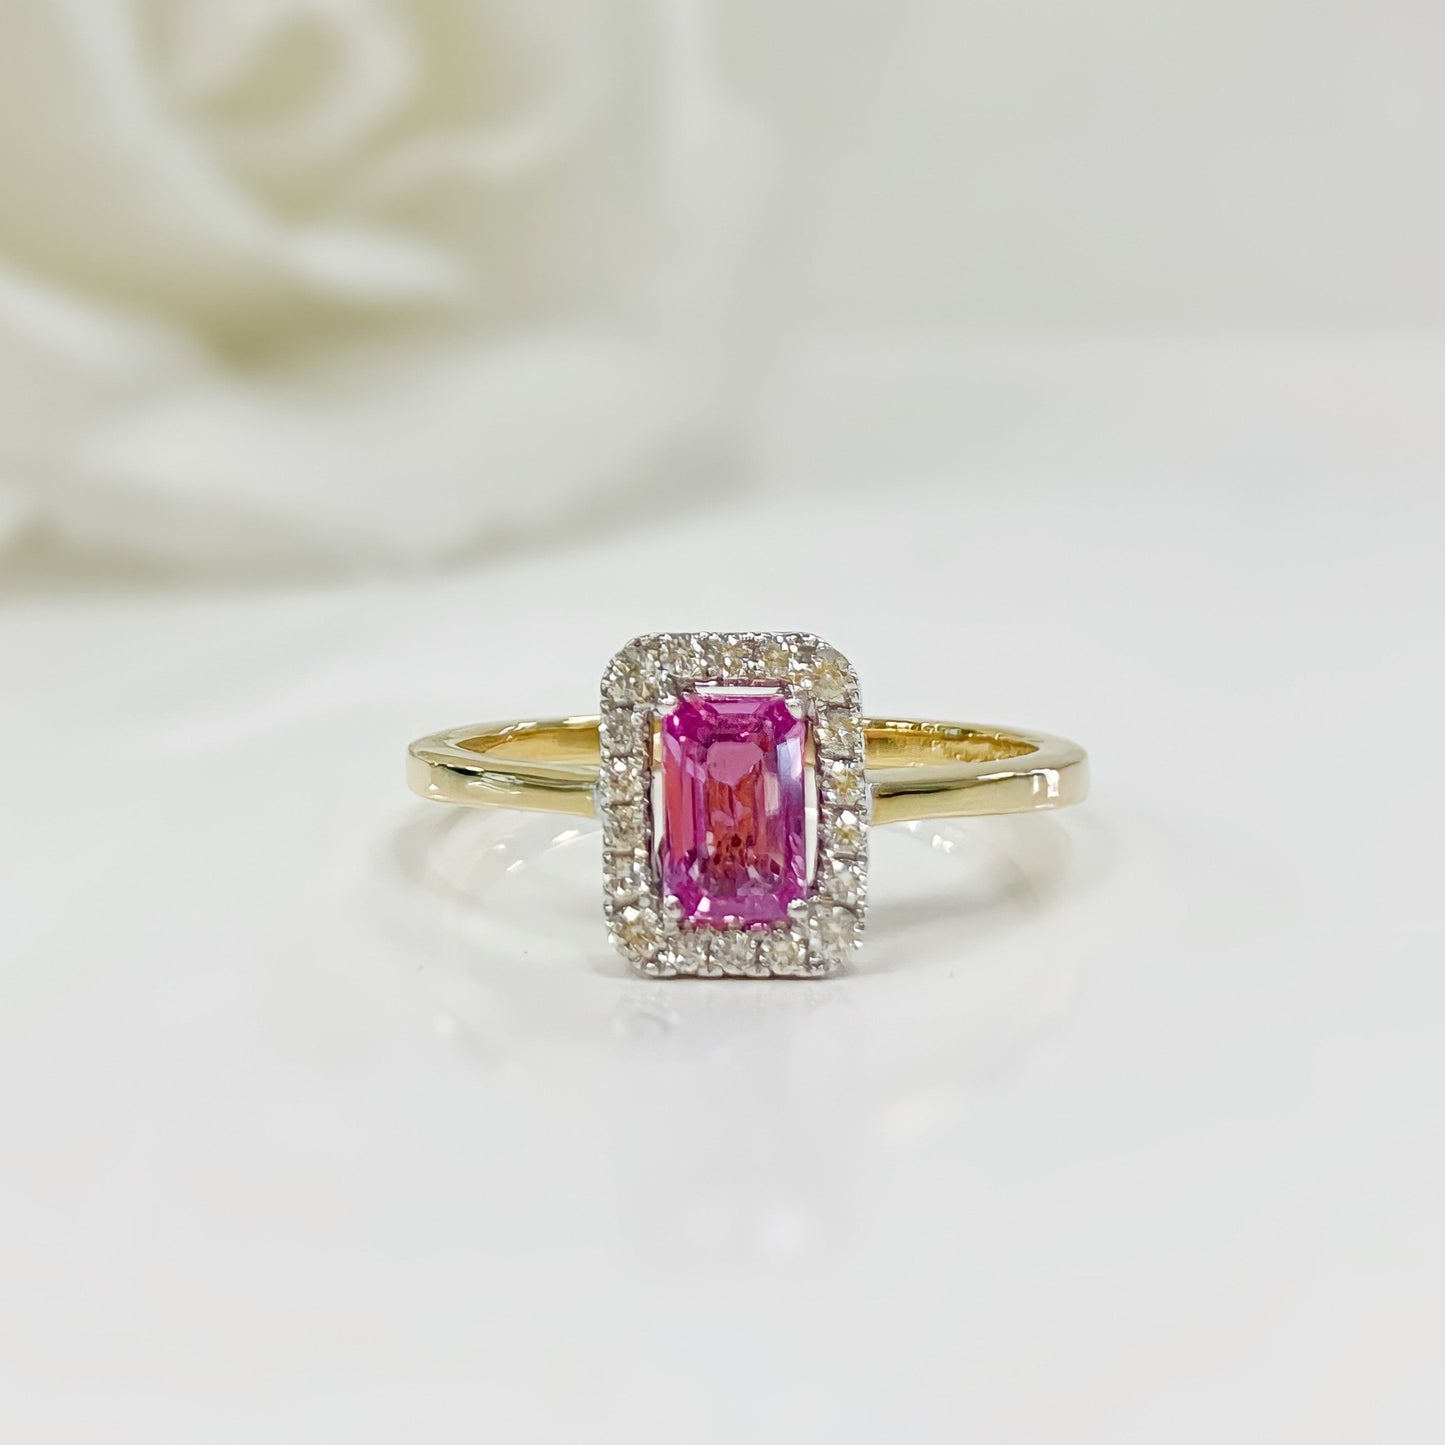 Sweet 18ct Yellow Gold Pink Sapphire and Diamond Ring - SIZE N1/2